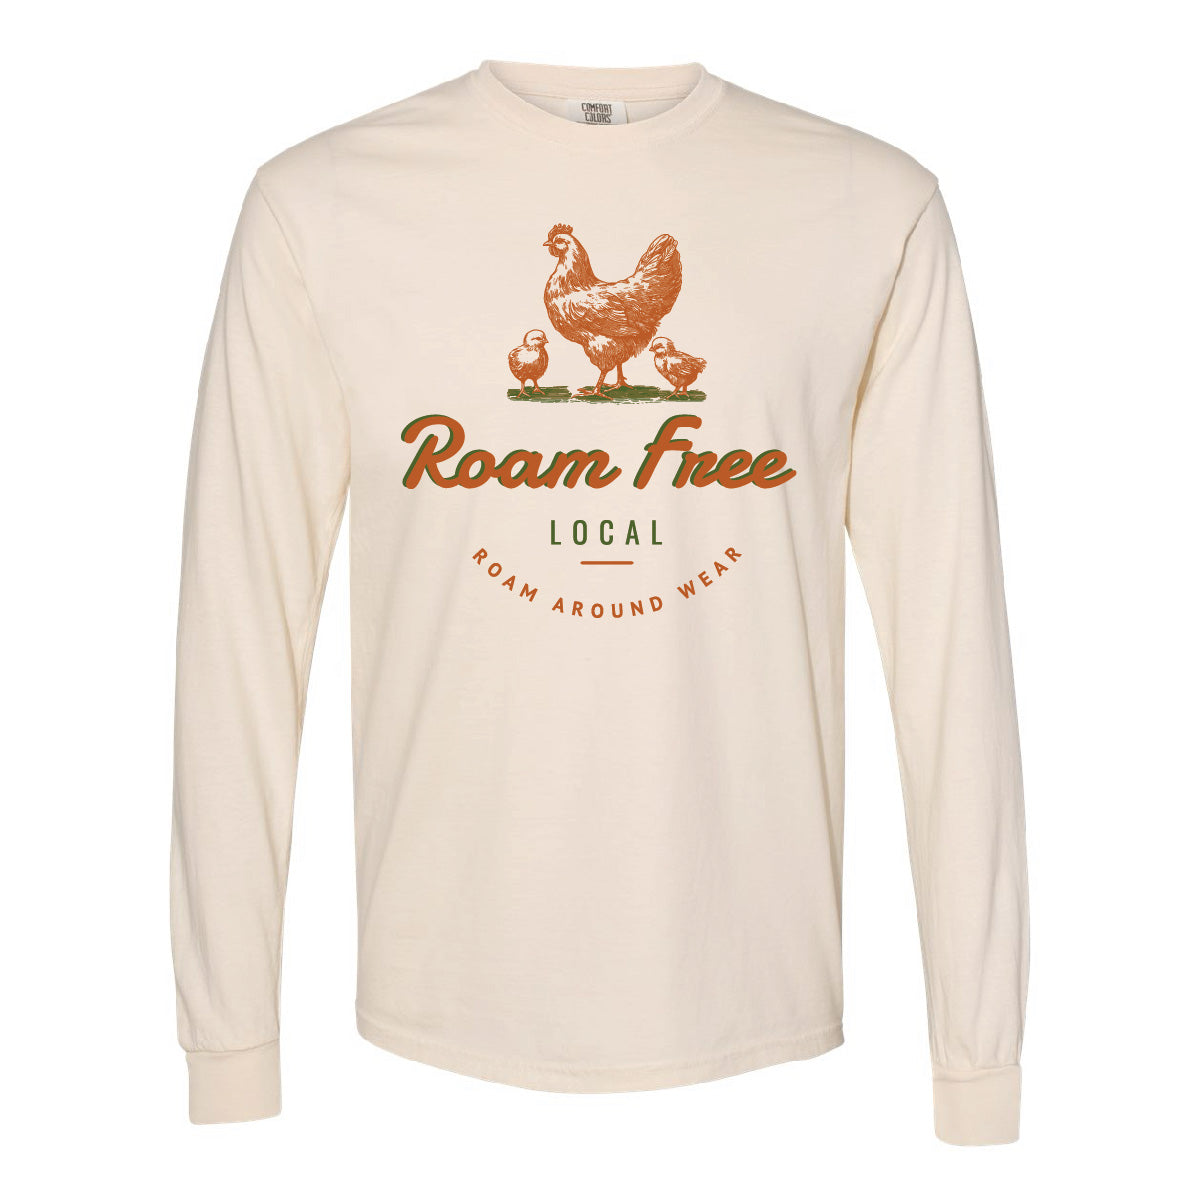 Roam Free Chicken Long Sleeve Tee. Chicken Shirt. Ranch Shirt. Roam Around Wear is a Wyoming t-shirt company based in Gillette, Wyoming